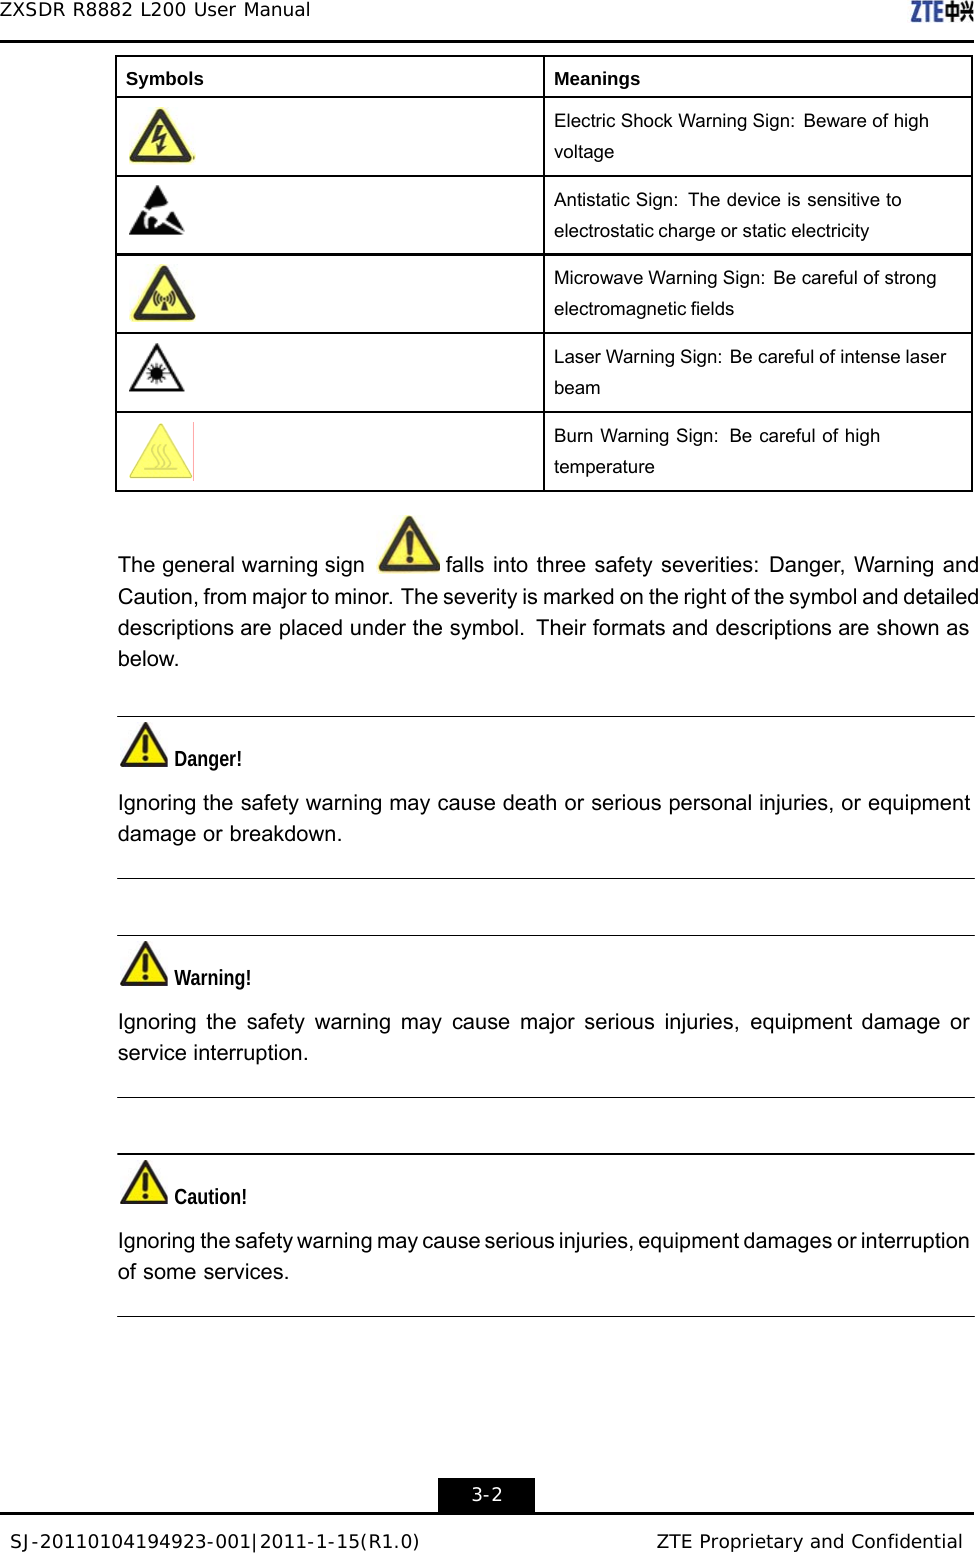 SJ-20110104194923-001|2011-1-15(R1.0) ZTE Proprietary and Confidential ZXSDR R8882 L200 User Manual     Symbols Meanings  Electric Shock Warning Sign:  Beware of high voltage  Antistatic Sign:  The device is sensitive to electrostatic charge or static electricity  Microwave Warning Sign: Be careful of strong electromagnetic fields  Laser Warning Sign:  Be careful of intense laser beam  Burn Warning Sign:  Be careful of high temperature    The general warning sign  falls into three safety severities: Danger, Warning and Caution, from major to minor. The severity is marked on the right of the symbol and detailed descriptions are placed under the symbol.  Their formats and descriptions are shown as below.    Danger!  Ignoring the safety warning may cause death or serious personal injuries, or equipment damage or breakdown.       Warning!  Ignoring the safety warning may cause major serious injuries, equipment damage or service interruption.       Caution!  Ignoring the safety warning may cause serious injuries, equipment damages or interruption of some services.          3-2 